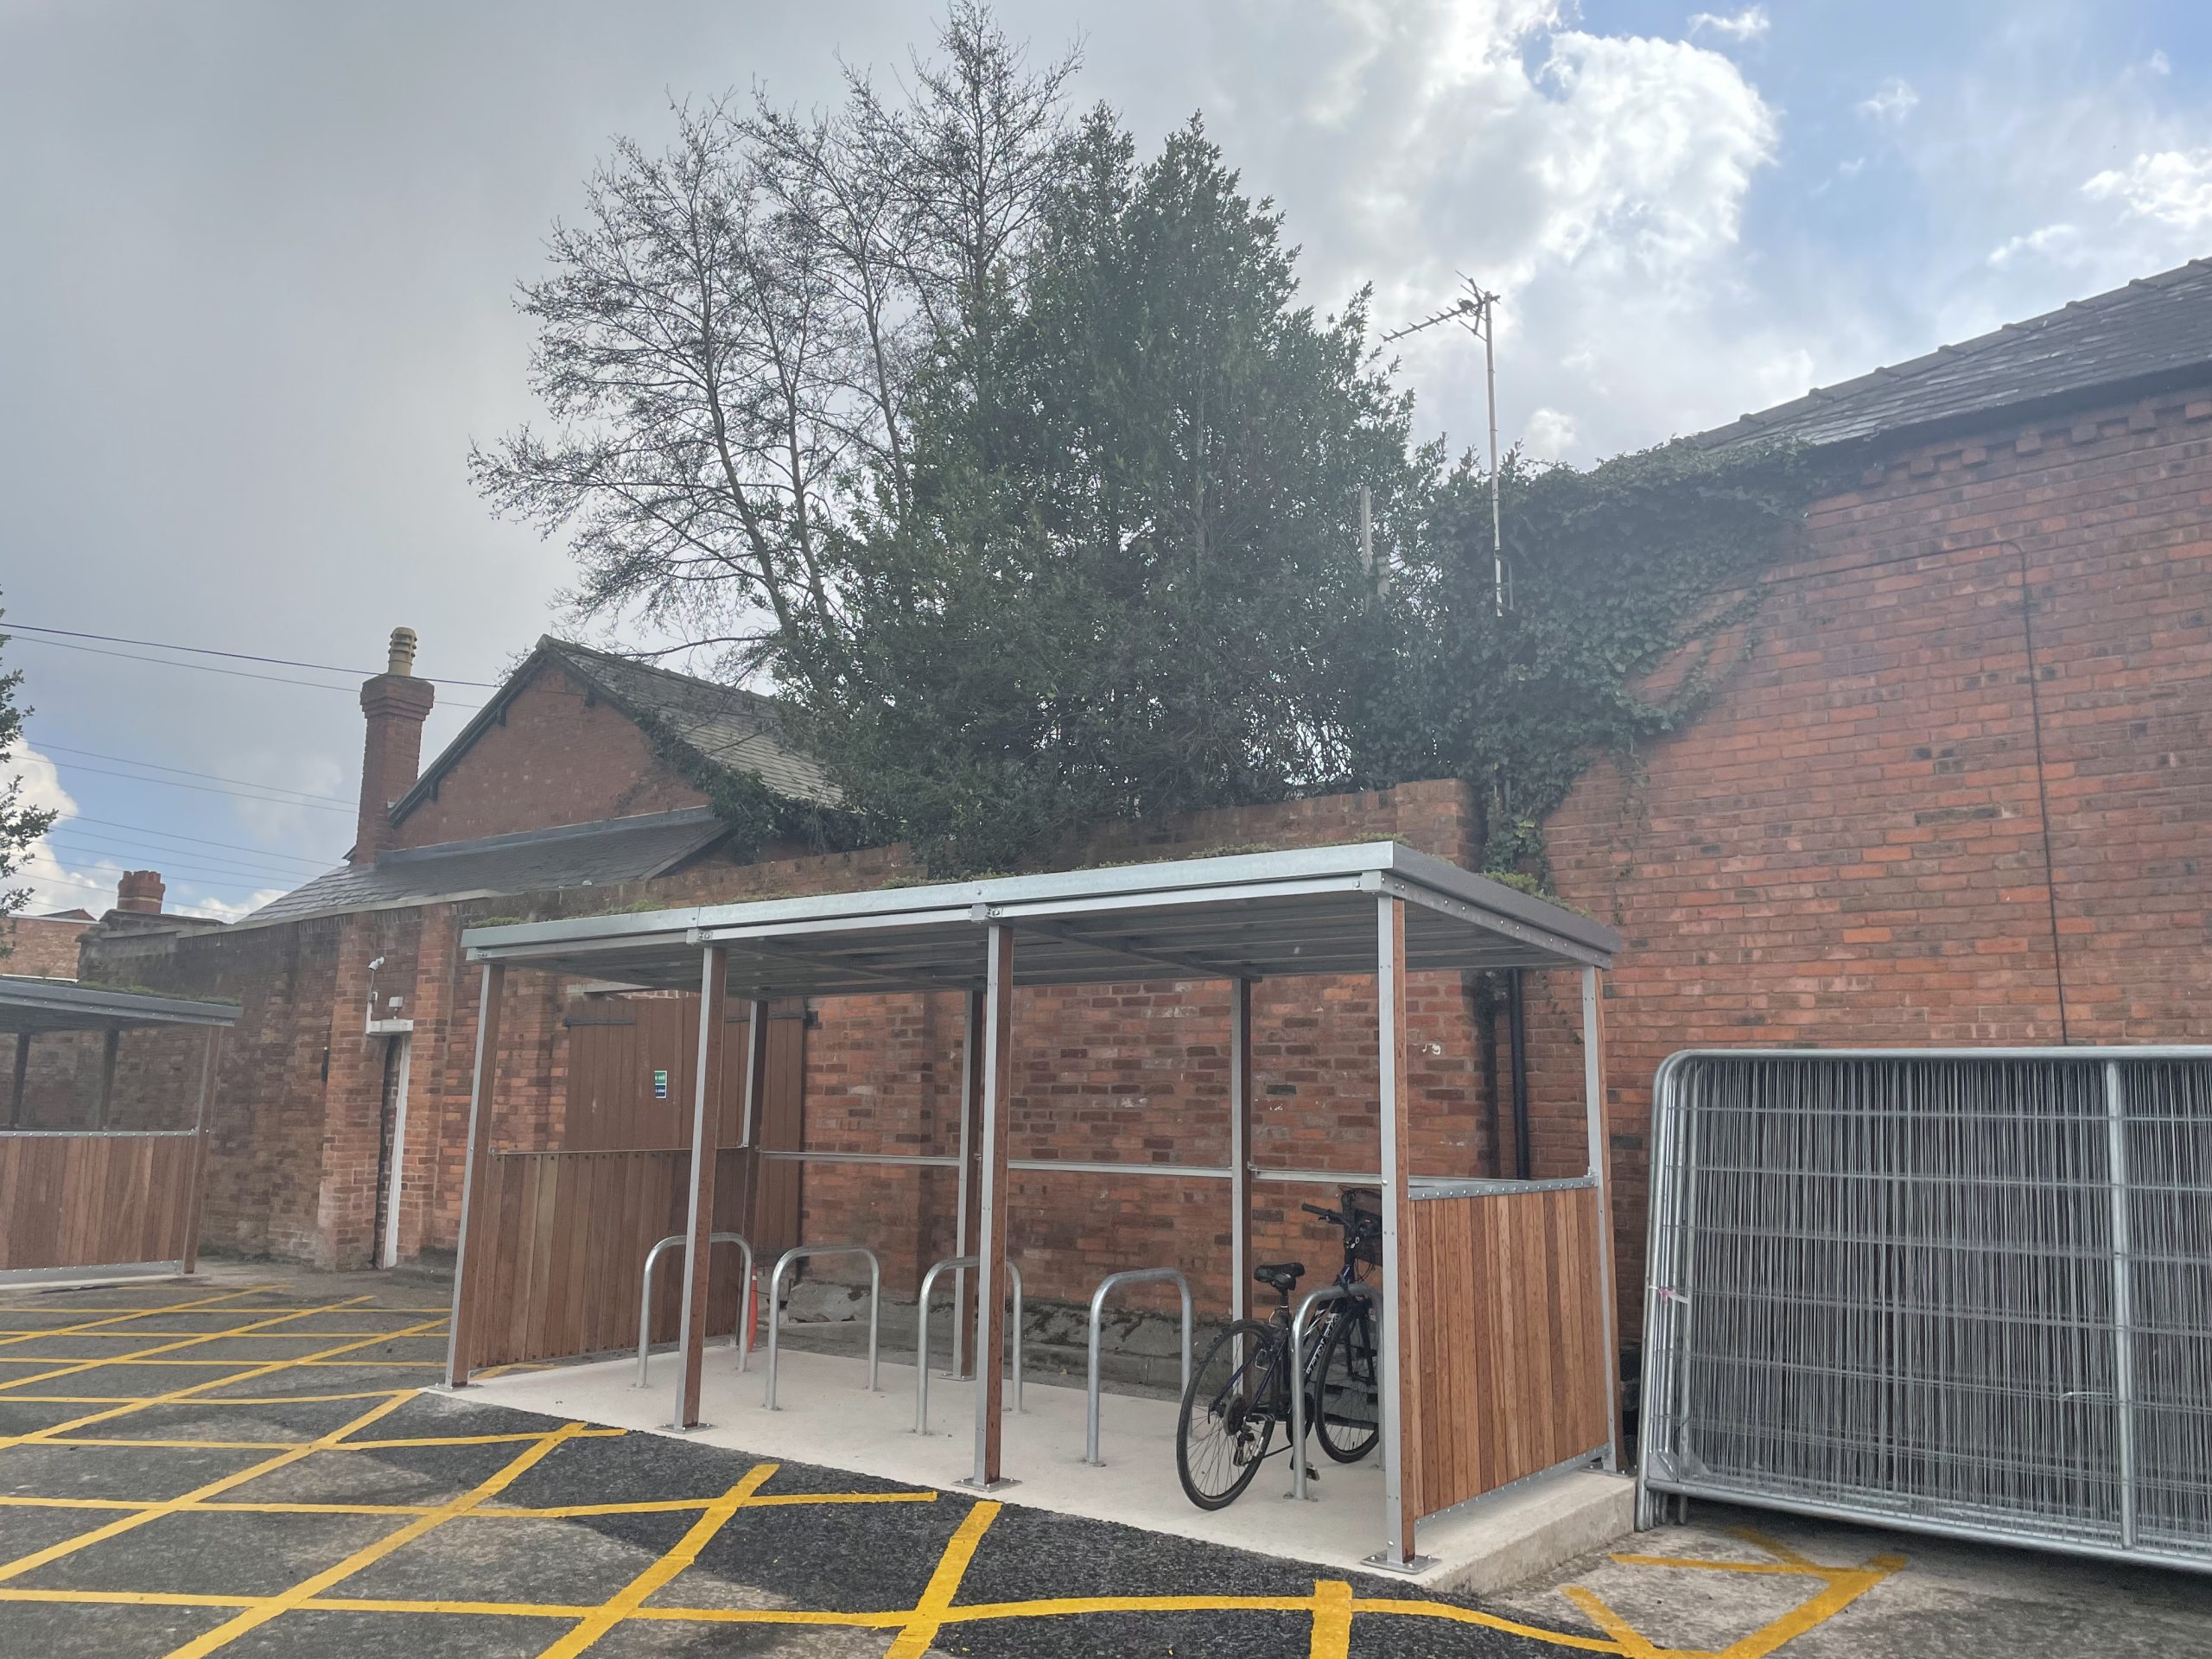 NEWS | The full cost of Hereford’s new green cycle shelters has been revealed